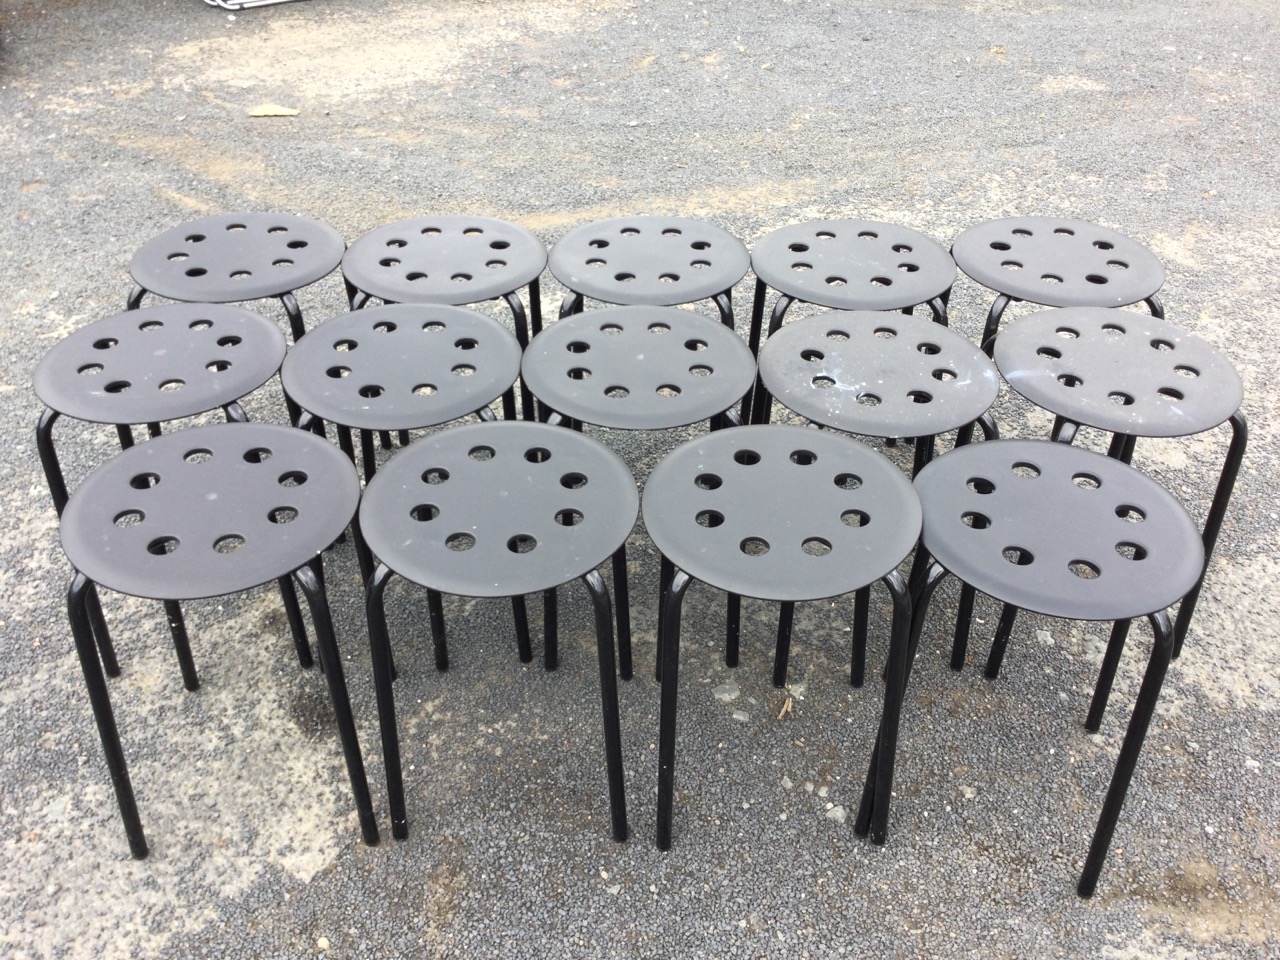 Fourteen circular stools with pierced seats on tubular legs - used as marquee seats for - Image 2 of 3